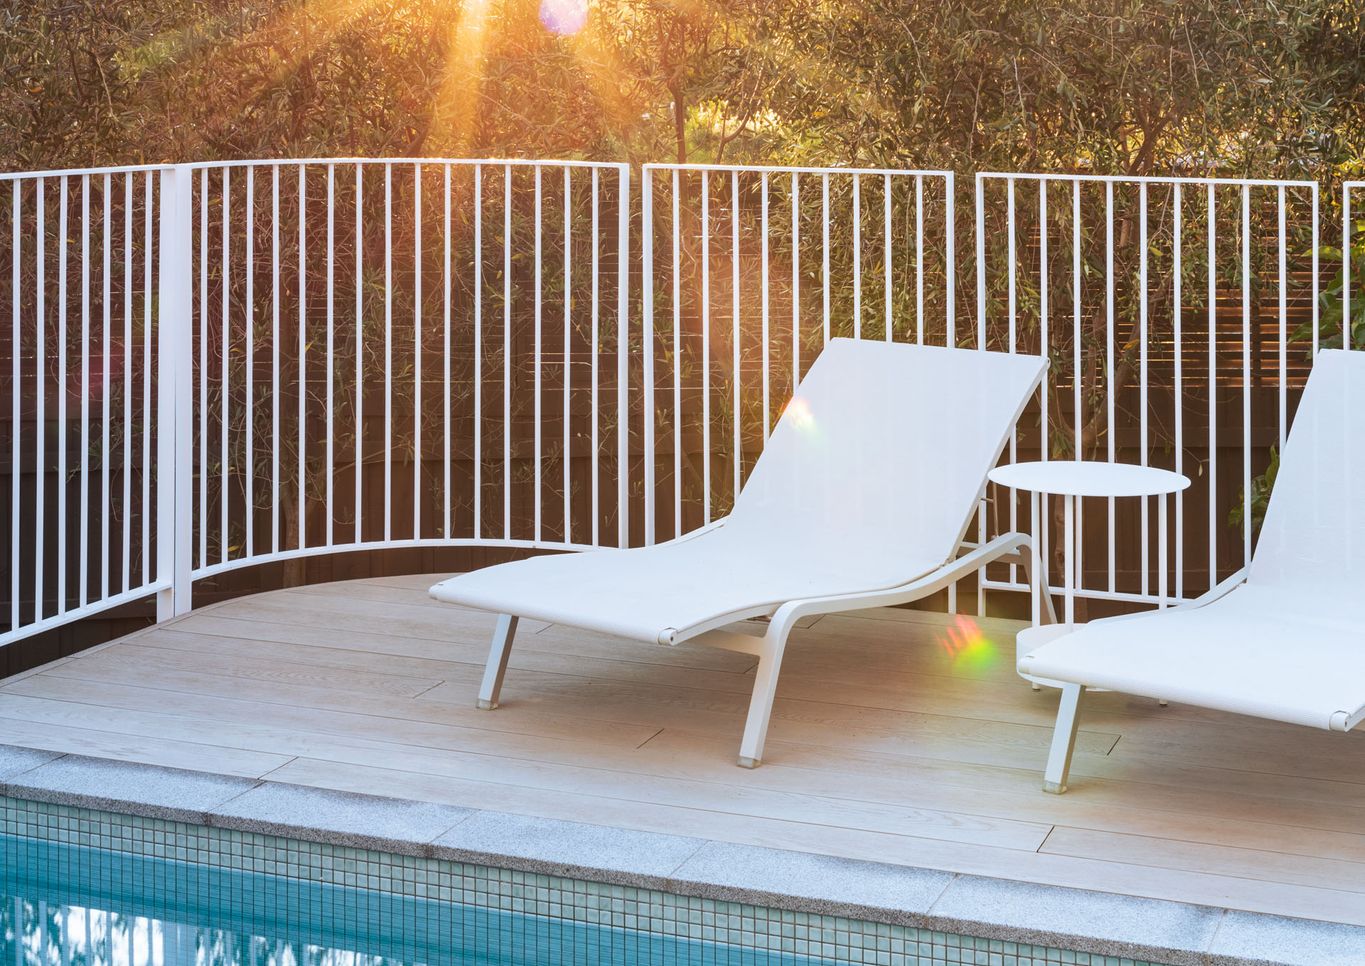 Curved pool fence and sun loungers on deck